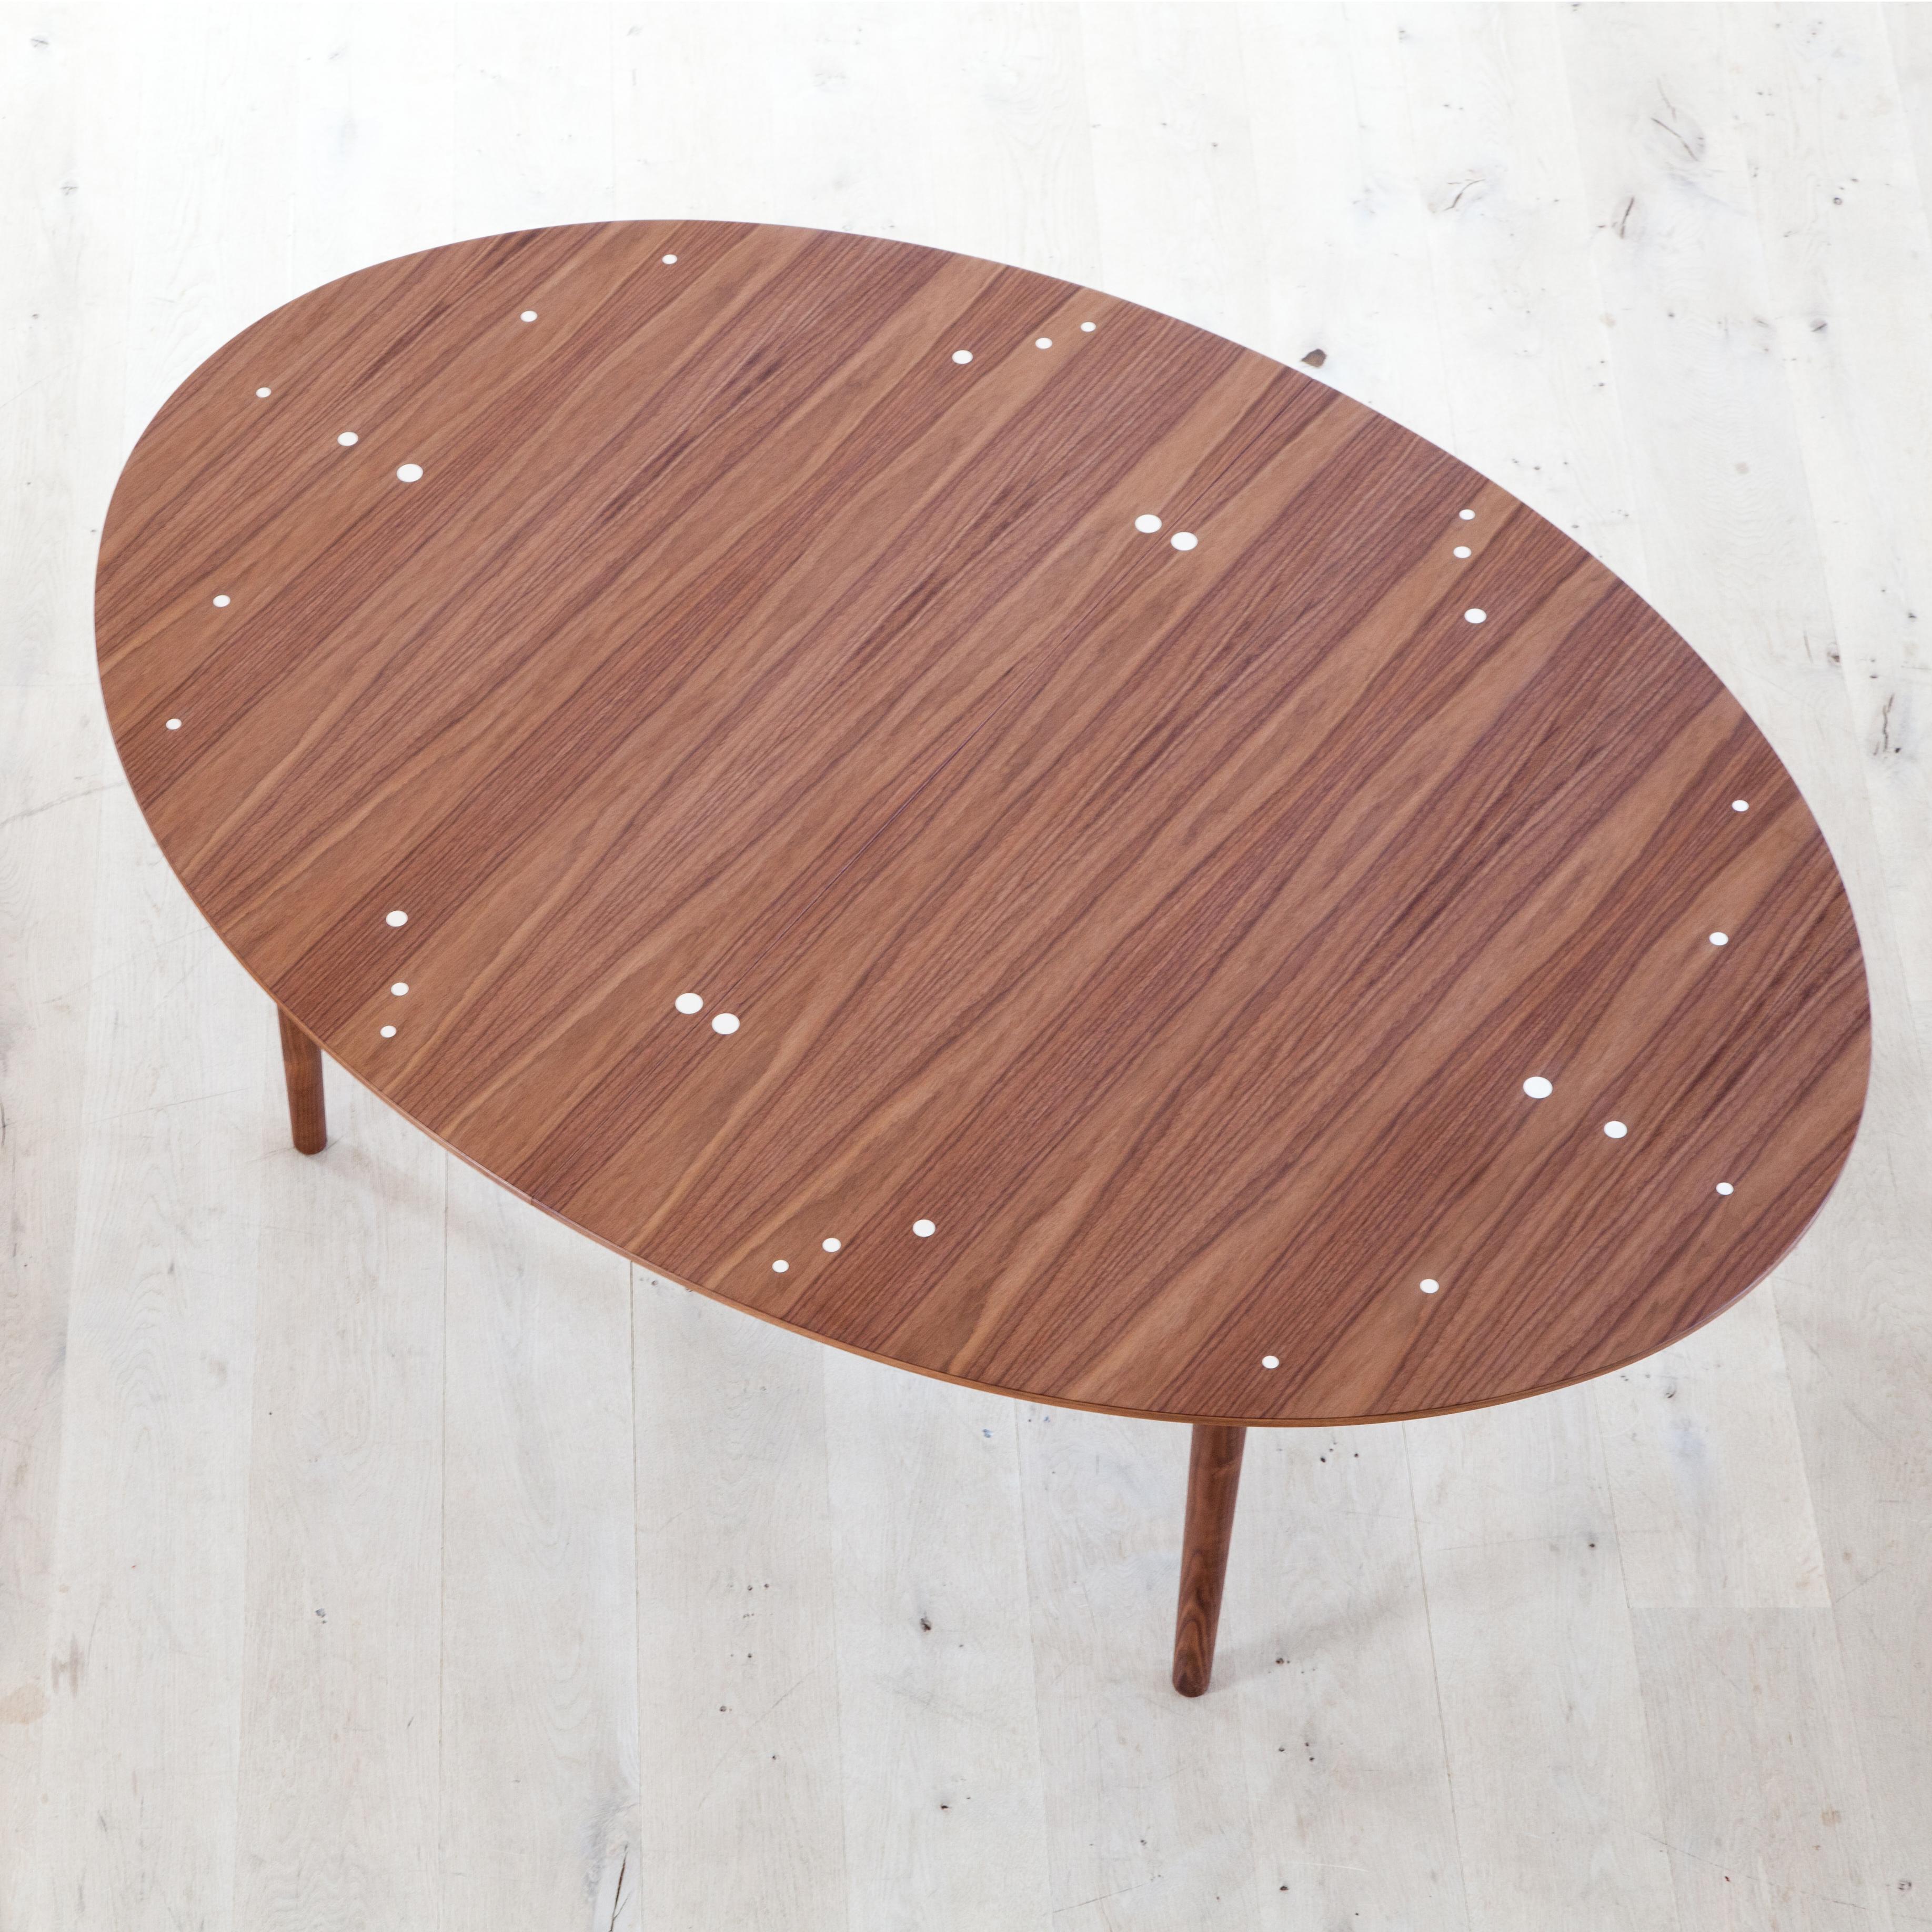 Table designed by Finn Juhl in 1948, relaunched in 2014.
Manufactured by House of Finn Juhl in Denmark.

This oval dining or conference table can be extended with two extra leaves, while the frame stays in the same position. The table was